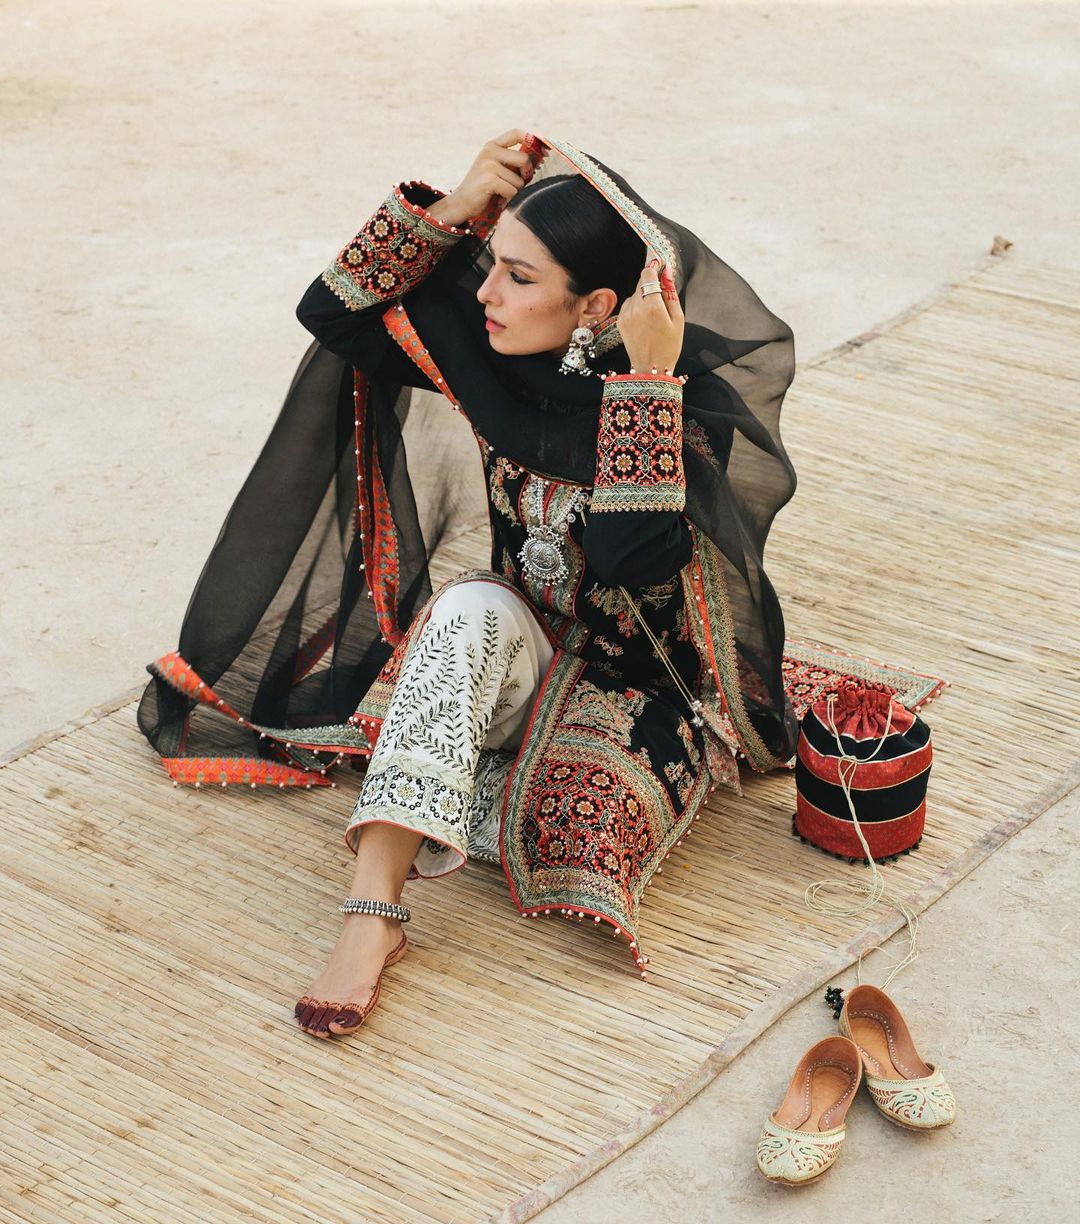 Ayeza Khan Gives Out Classic Traditional Vibes in Her Latest Photoshoot!